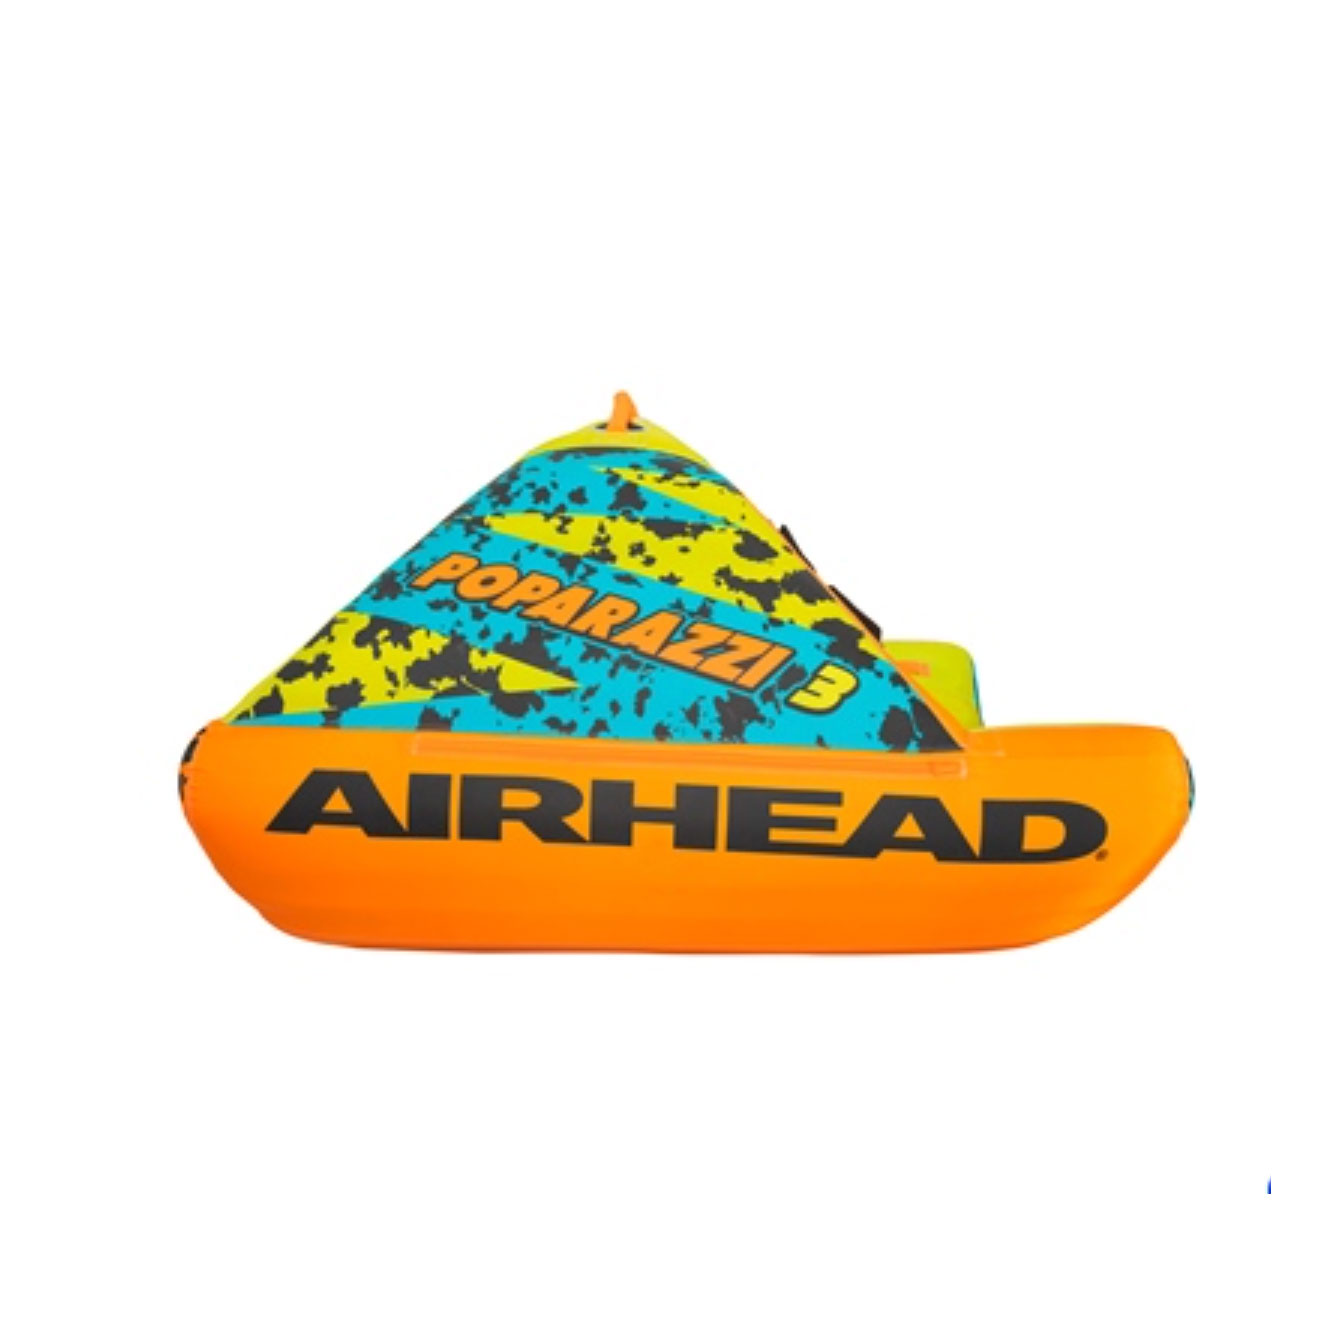 Airhead Poparazzi 3 Person Inflatable Heavy Gauge Pvc Towable Water